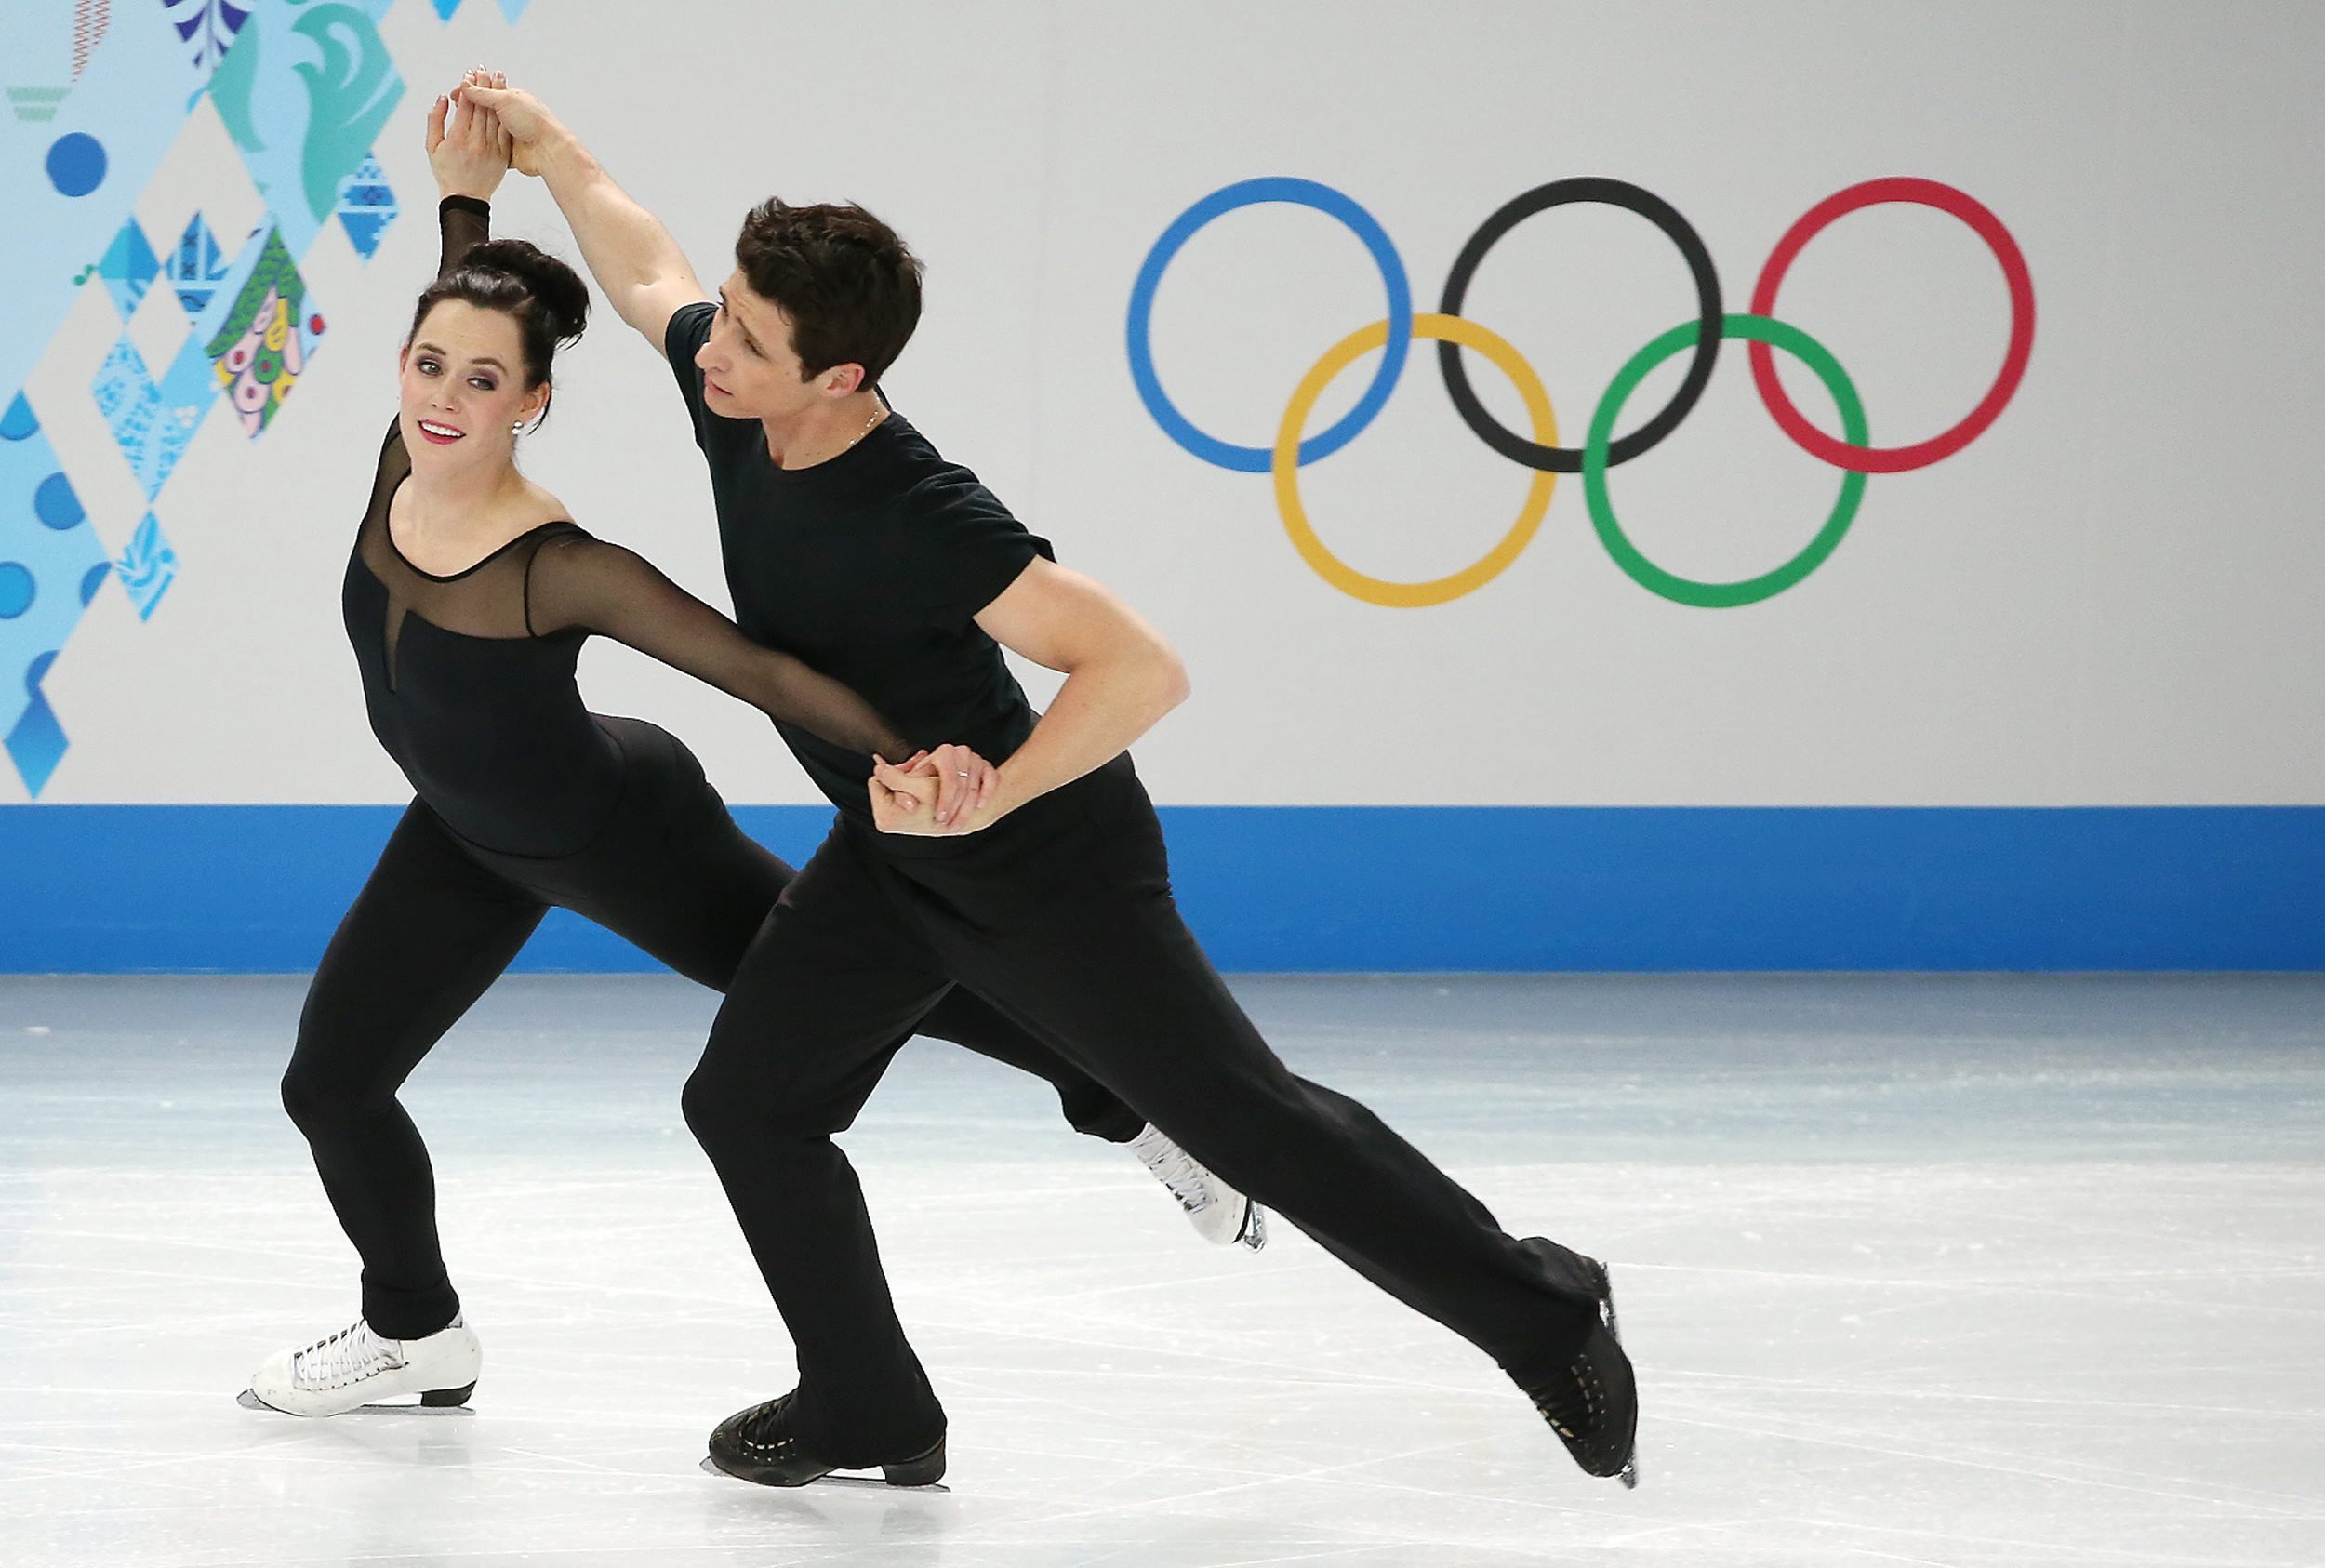 Winter Olympics 2014 figure skating schedule: Meryl Davis, Charlie White  looking for Olympic gold 